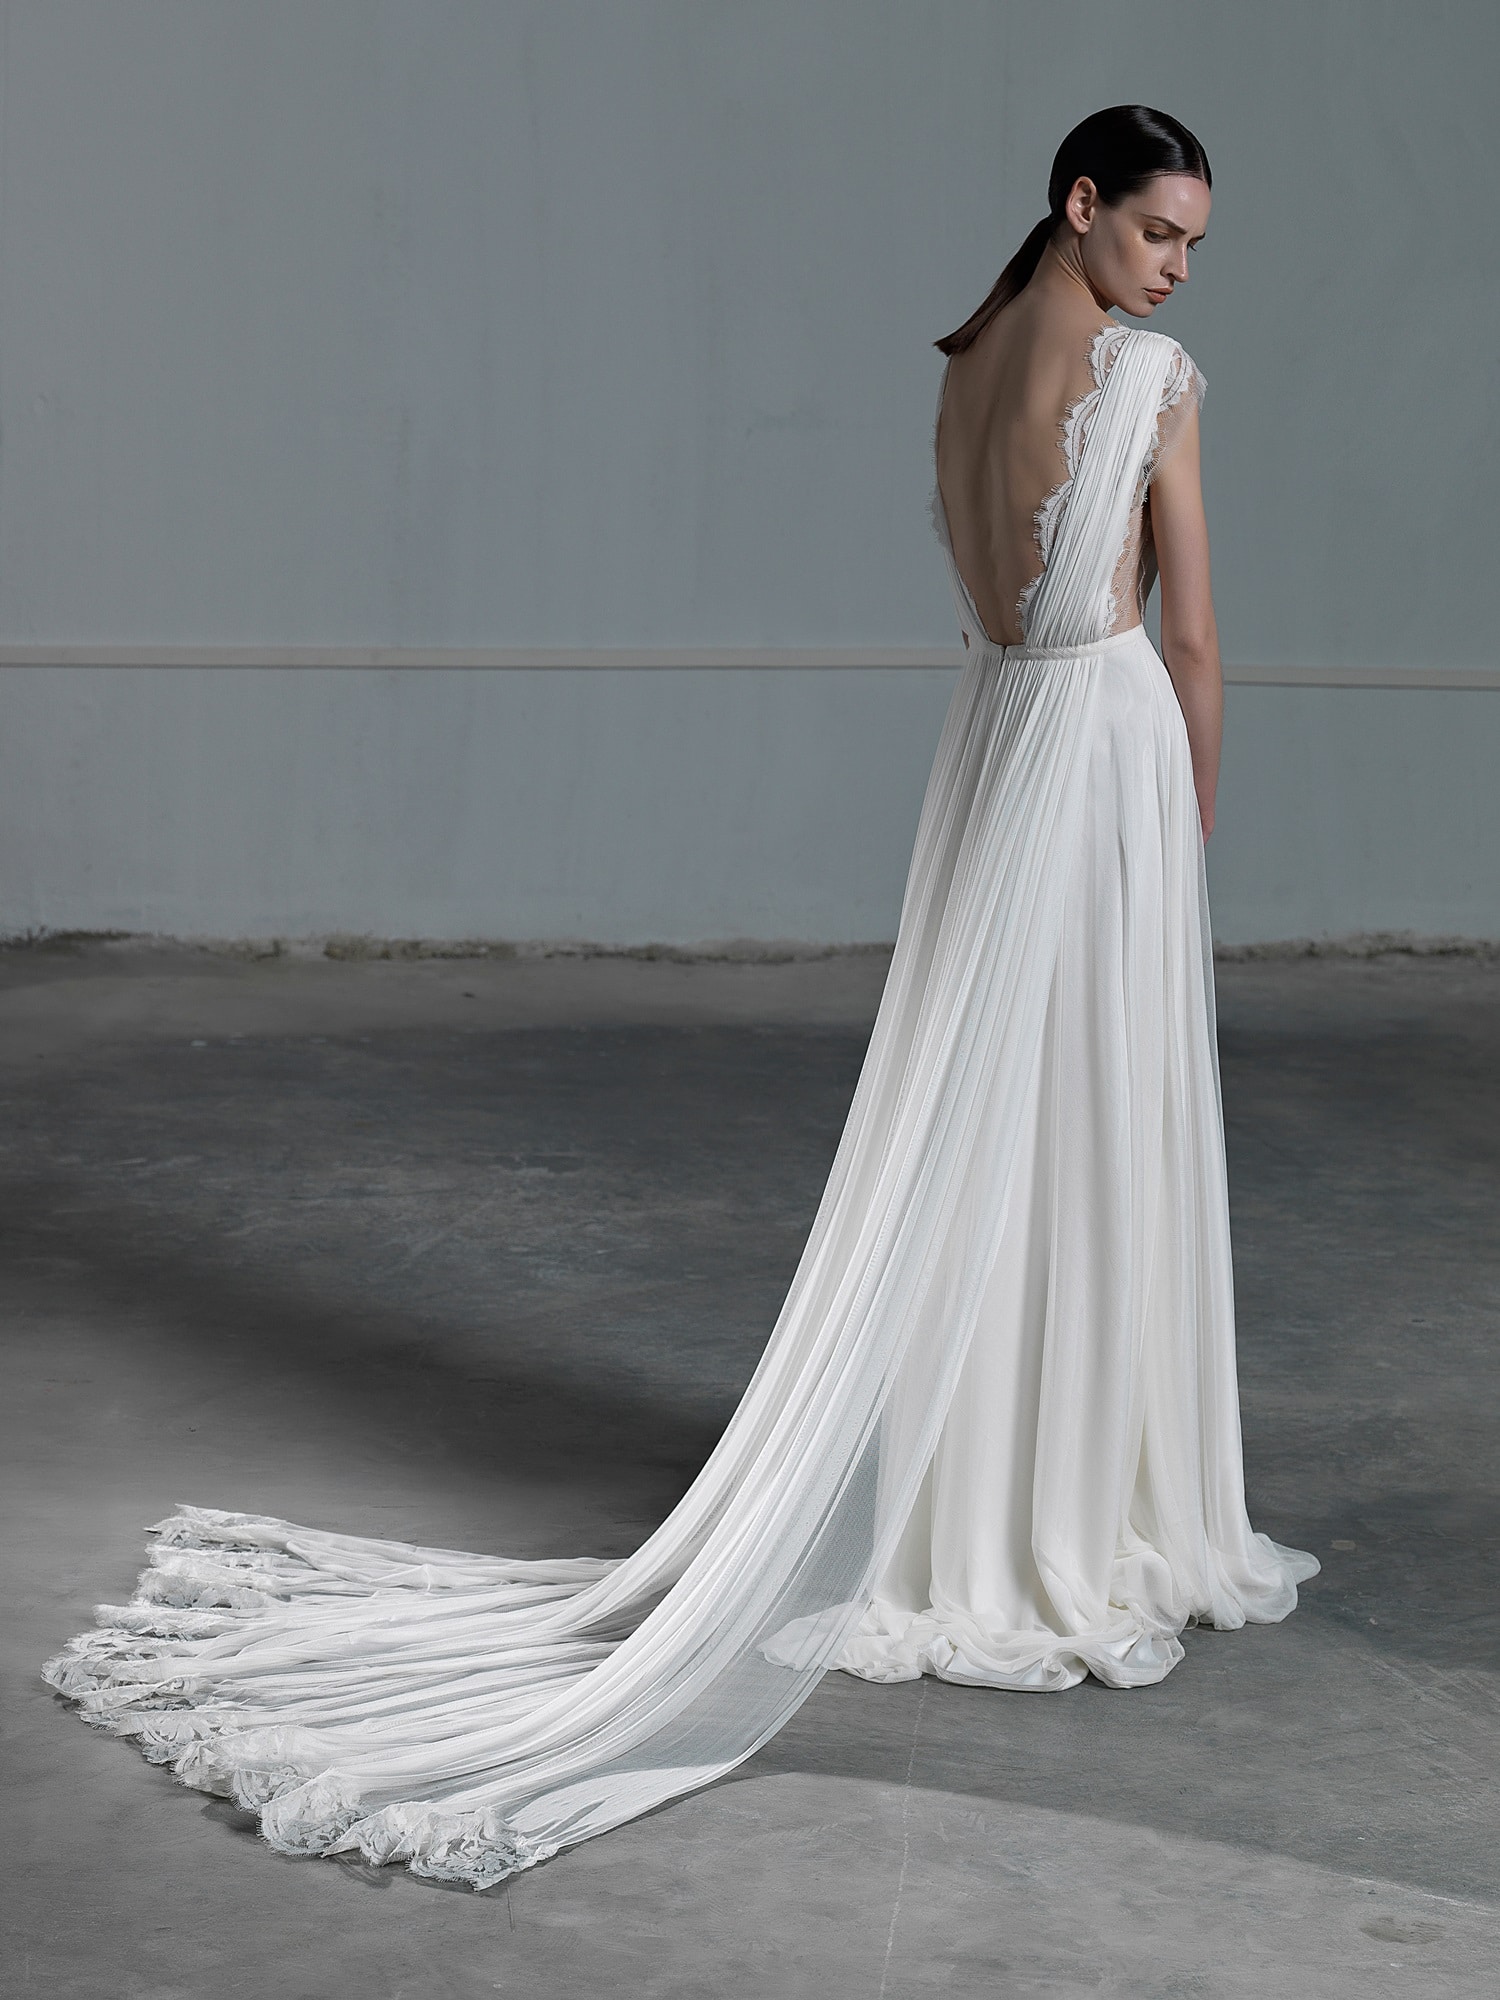 Romantic A line wedding dress with ethereal tulle skirt and lace top with low open back Vasia Tzotzopoulou